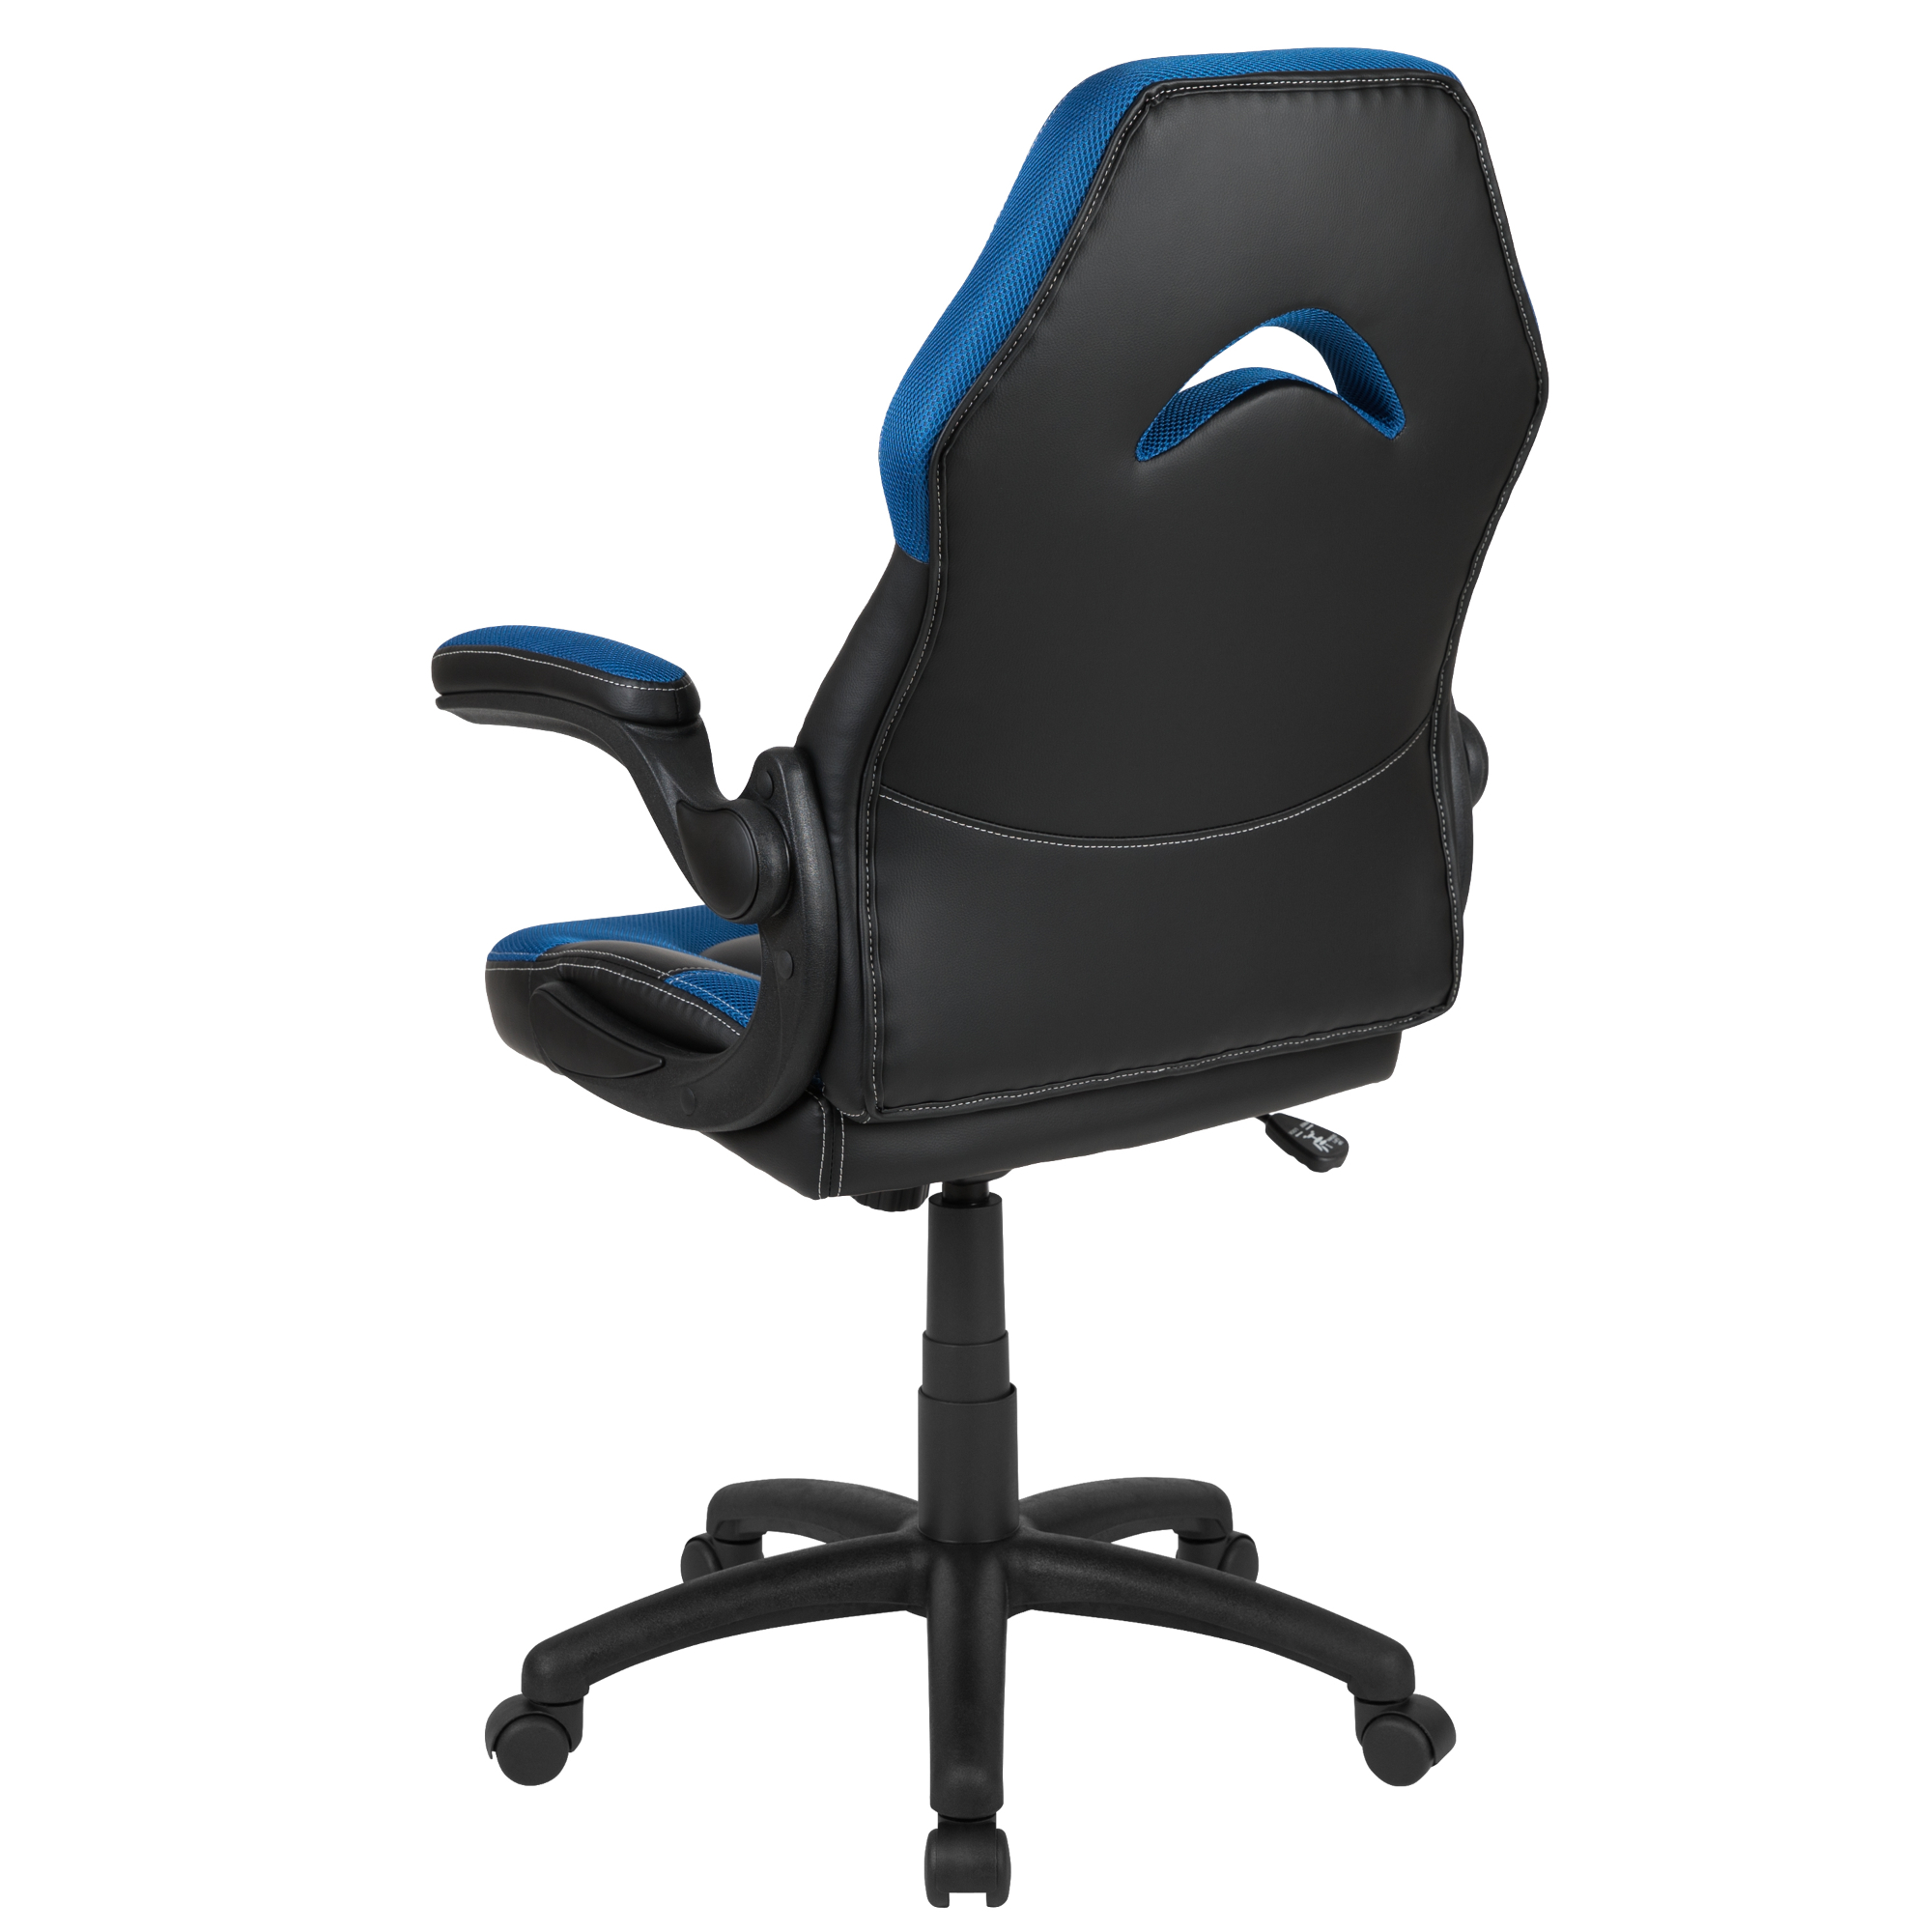 F&F Furniture Group 46.25" Blue and Black Office Ergonomic Adjustable X10 Gaming Swivel Chair with Flip-up Arms